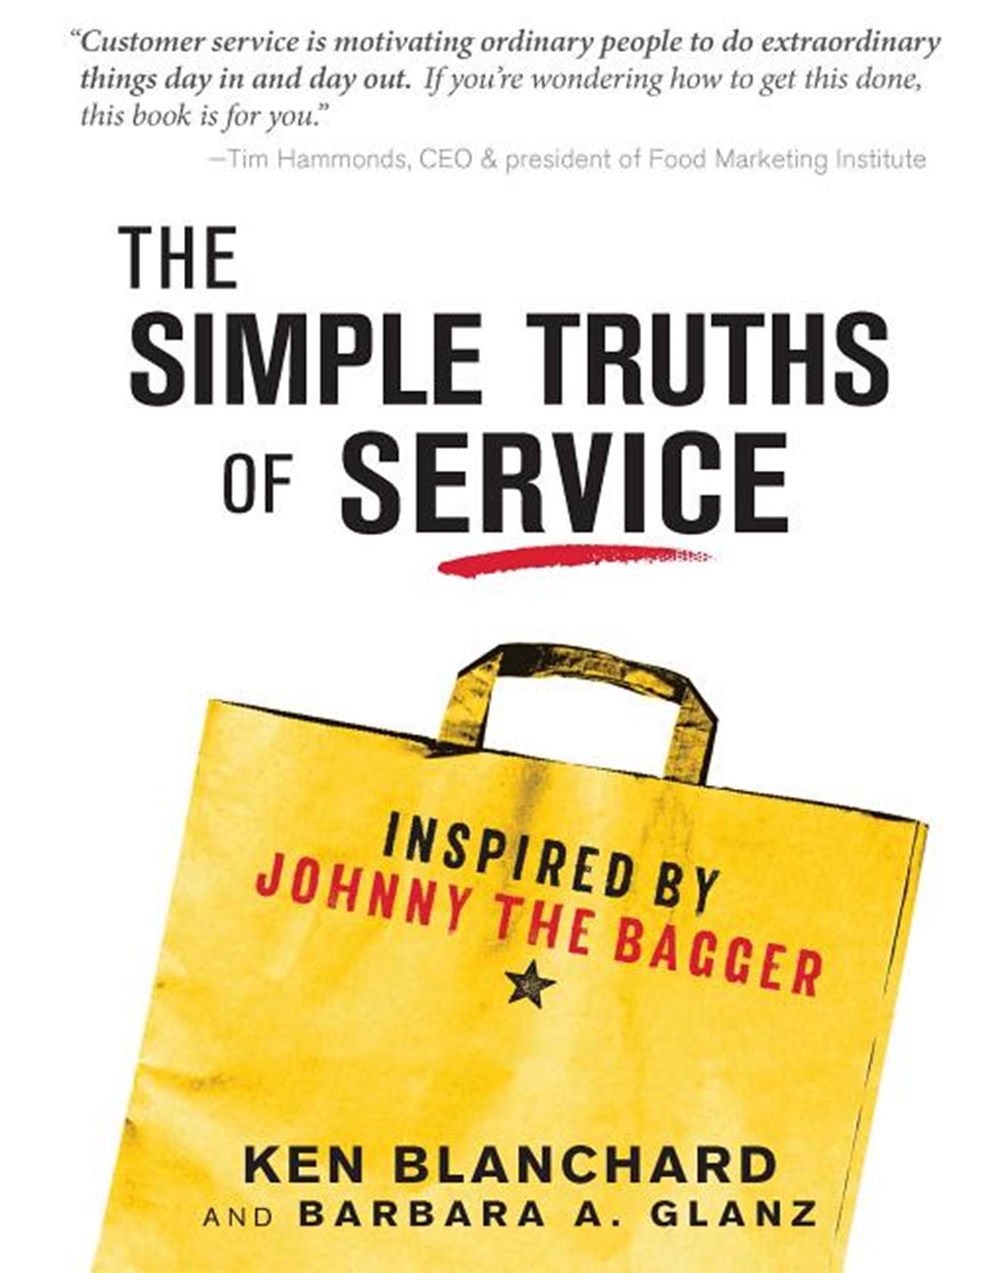 Simple Truths of Service Inspired by Johnny the Bagger